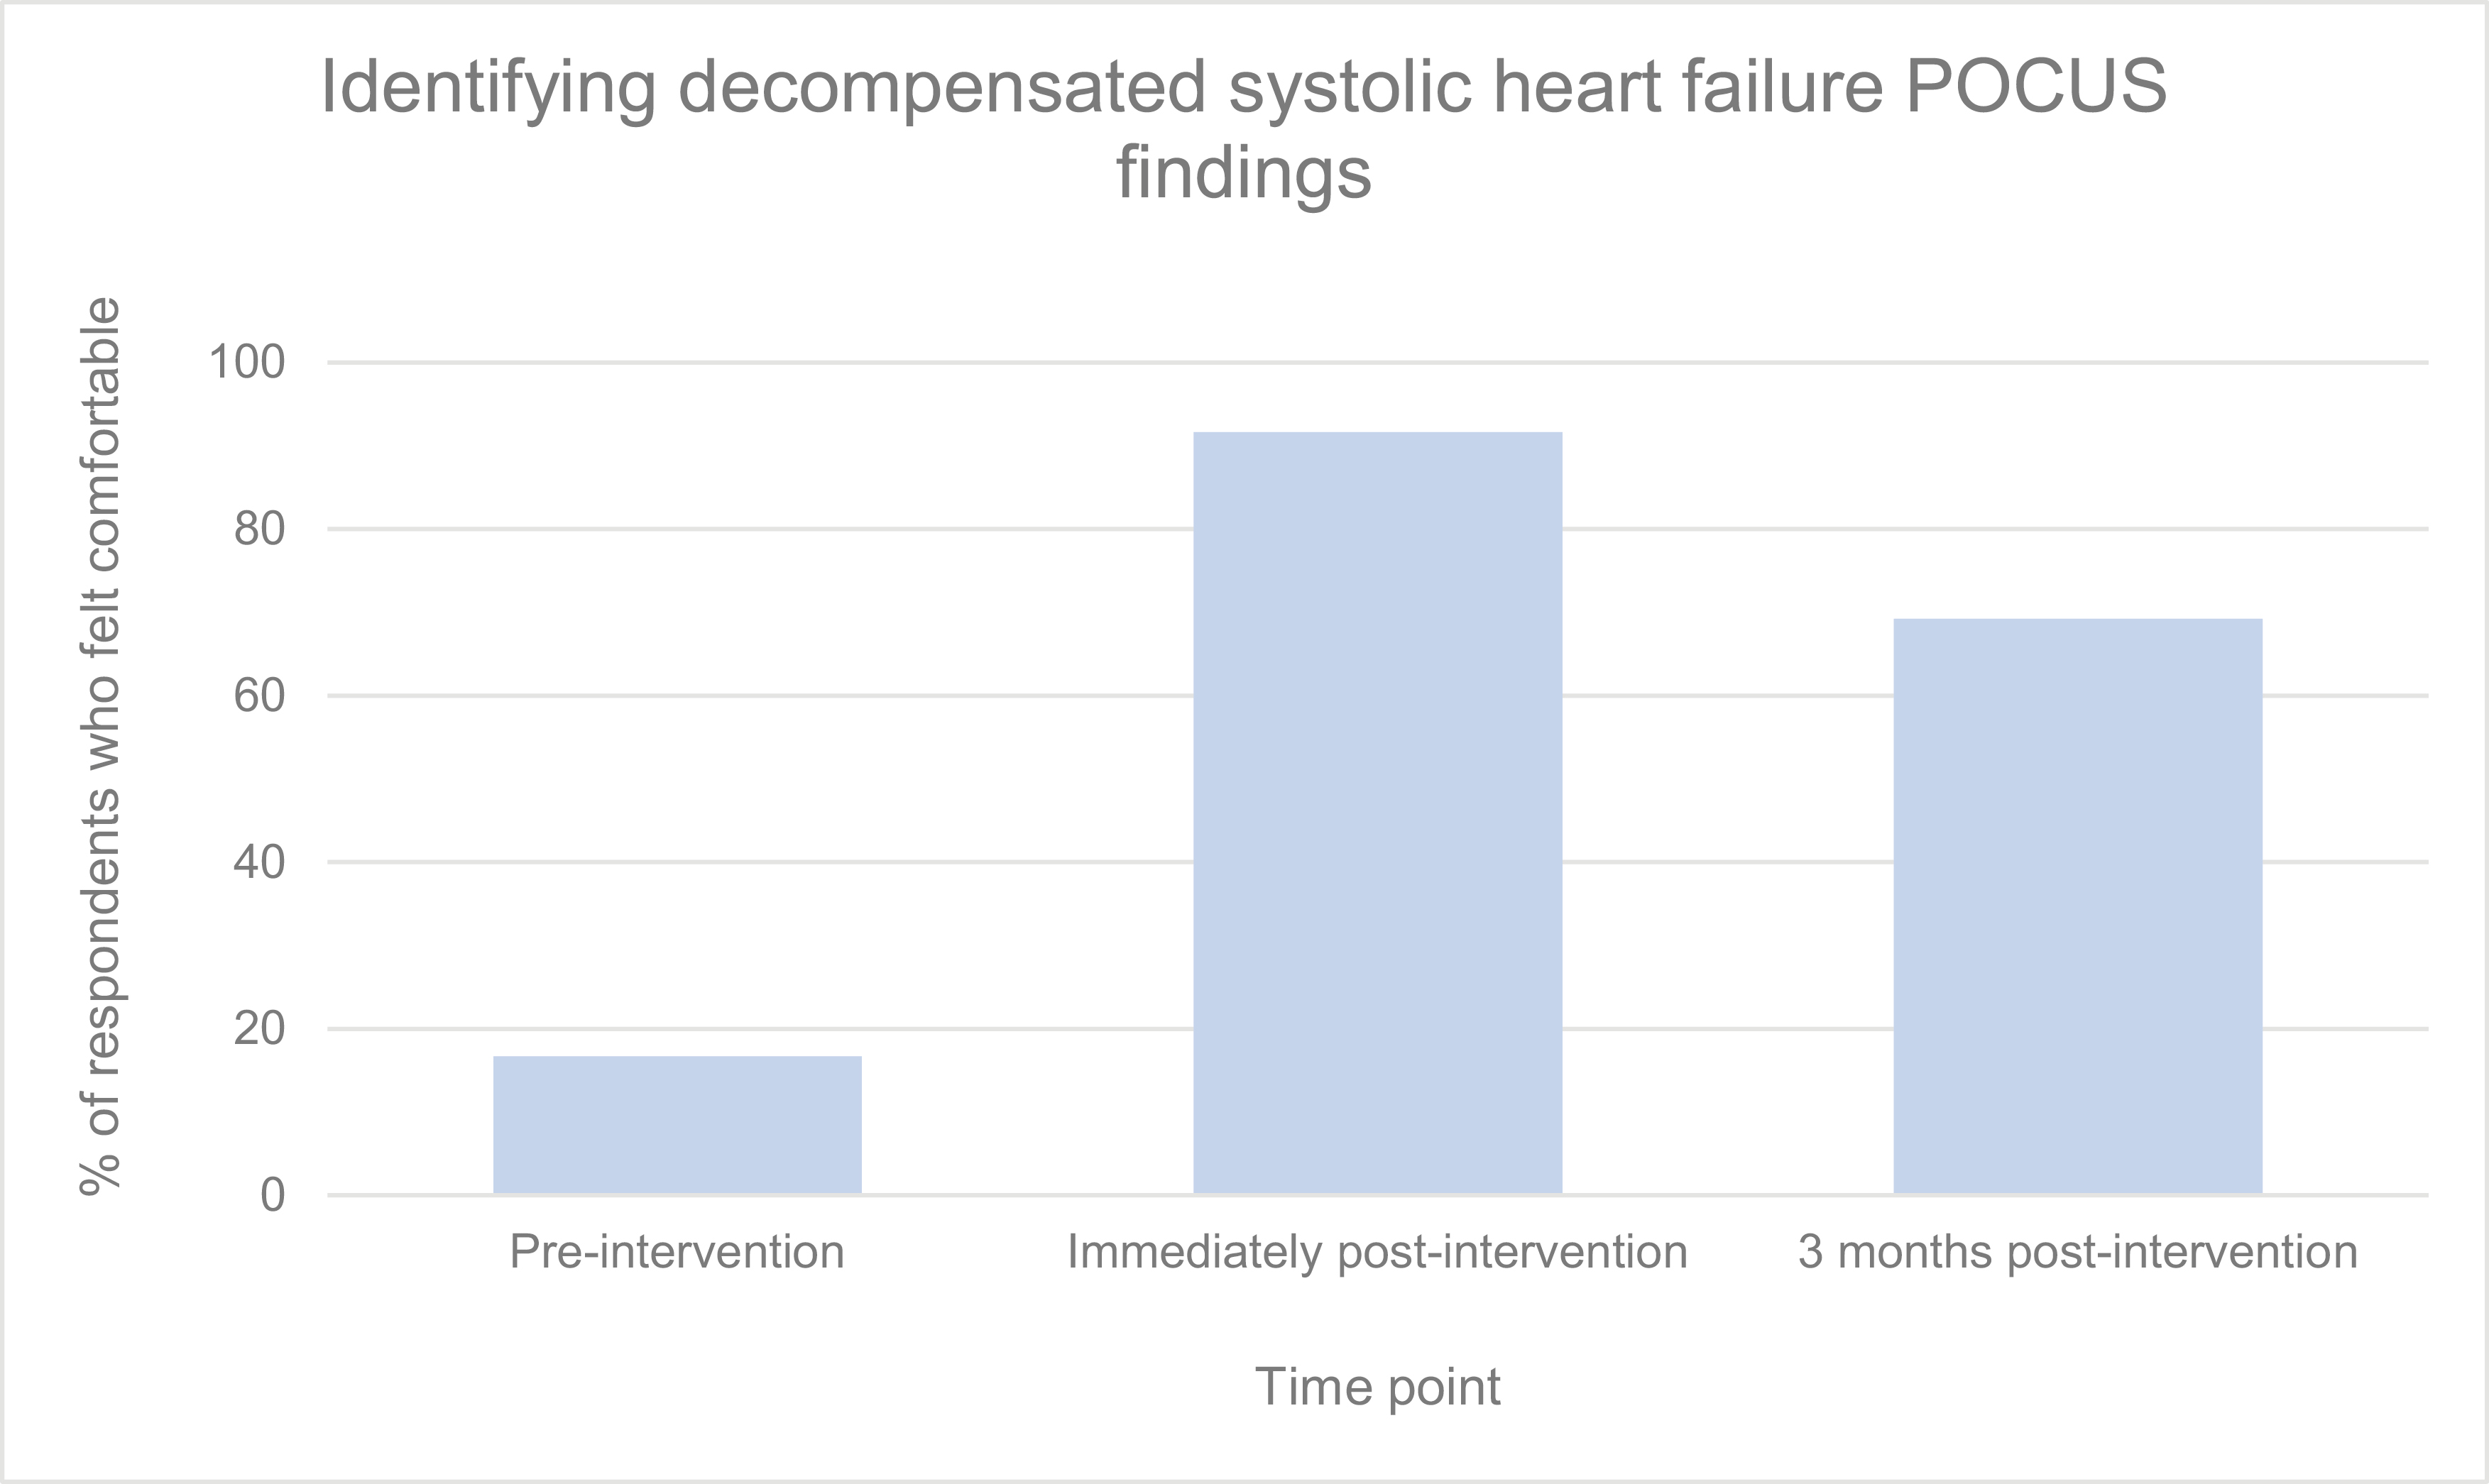 Percentage of respondents who felt comfortable identifying decompensated systolic heart failure POCUS findings at each time point